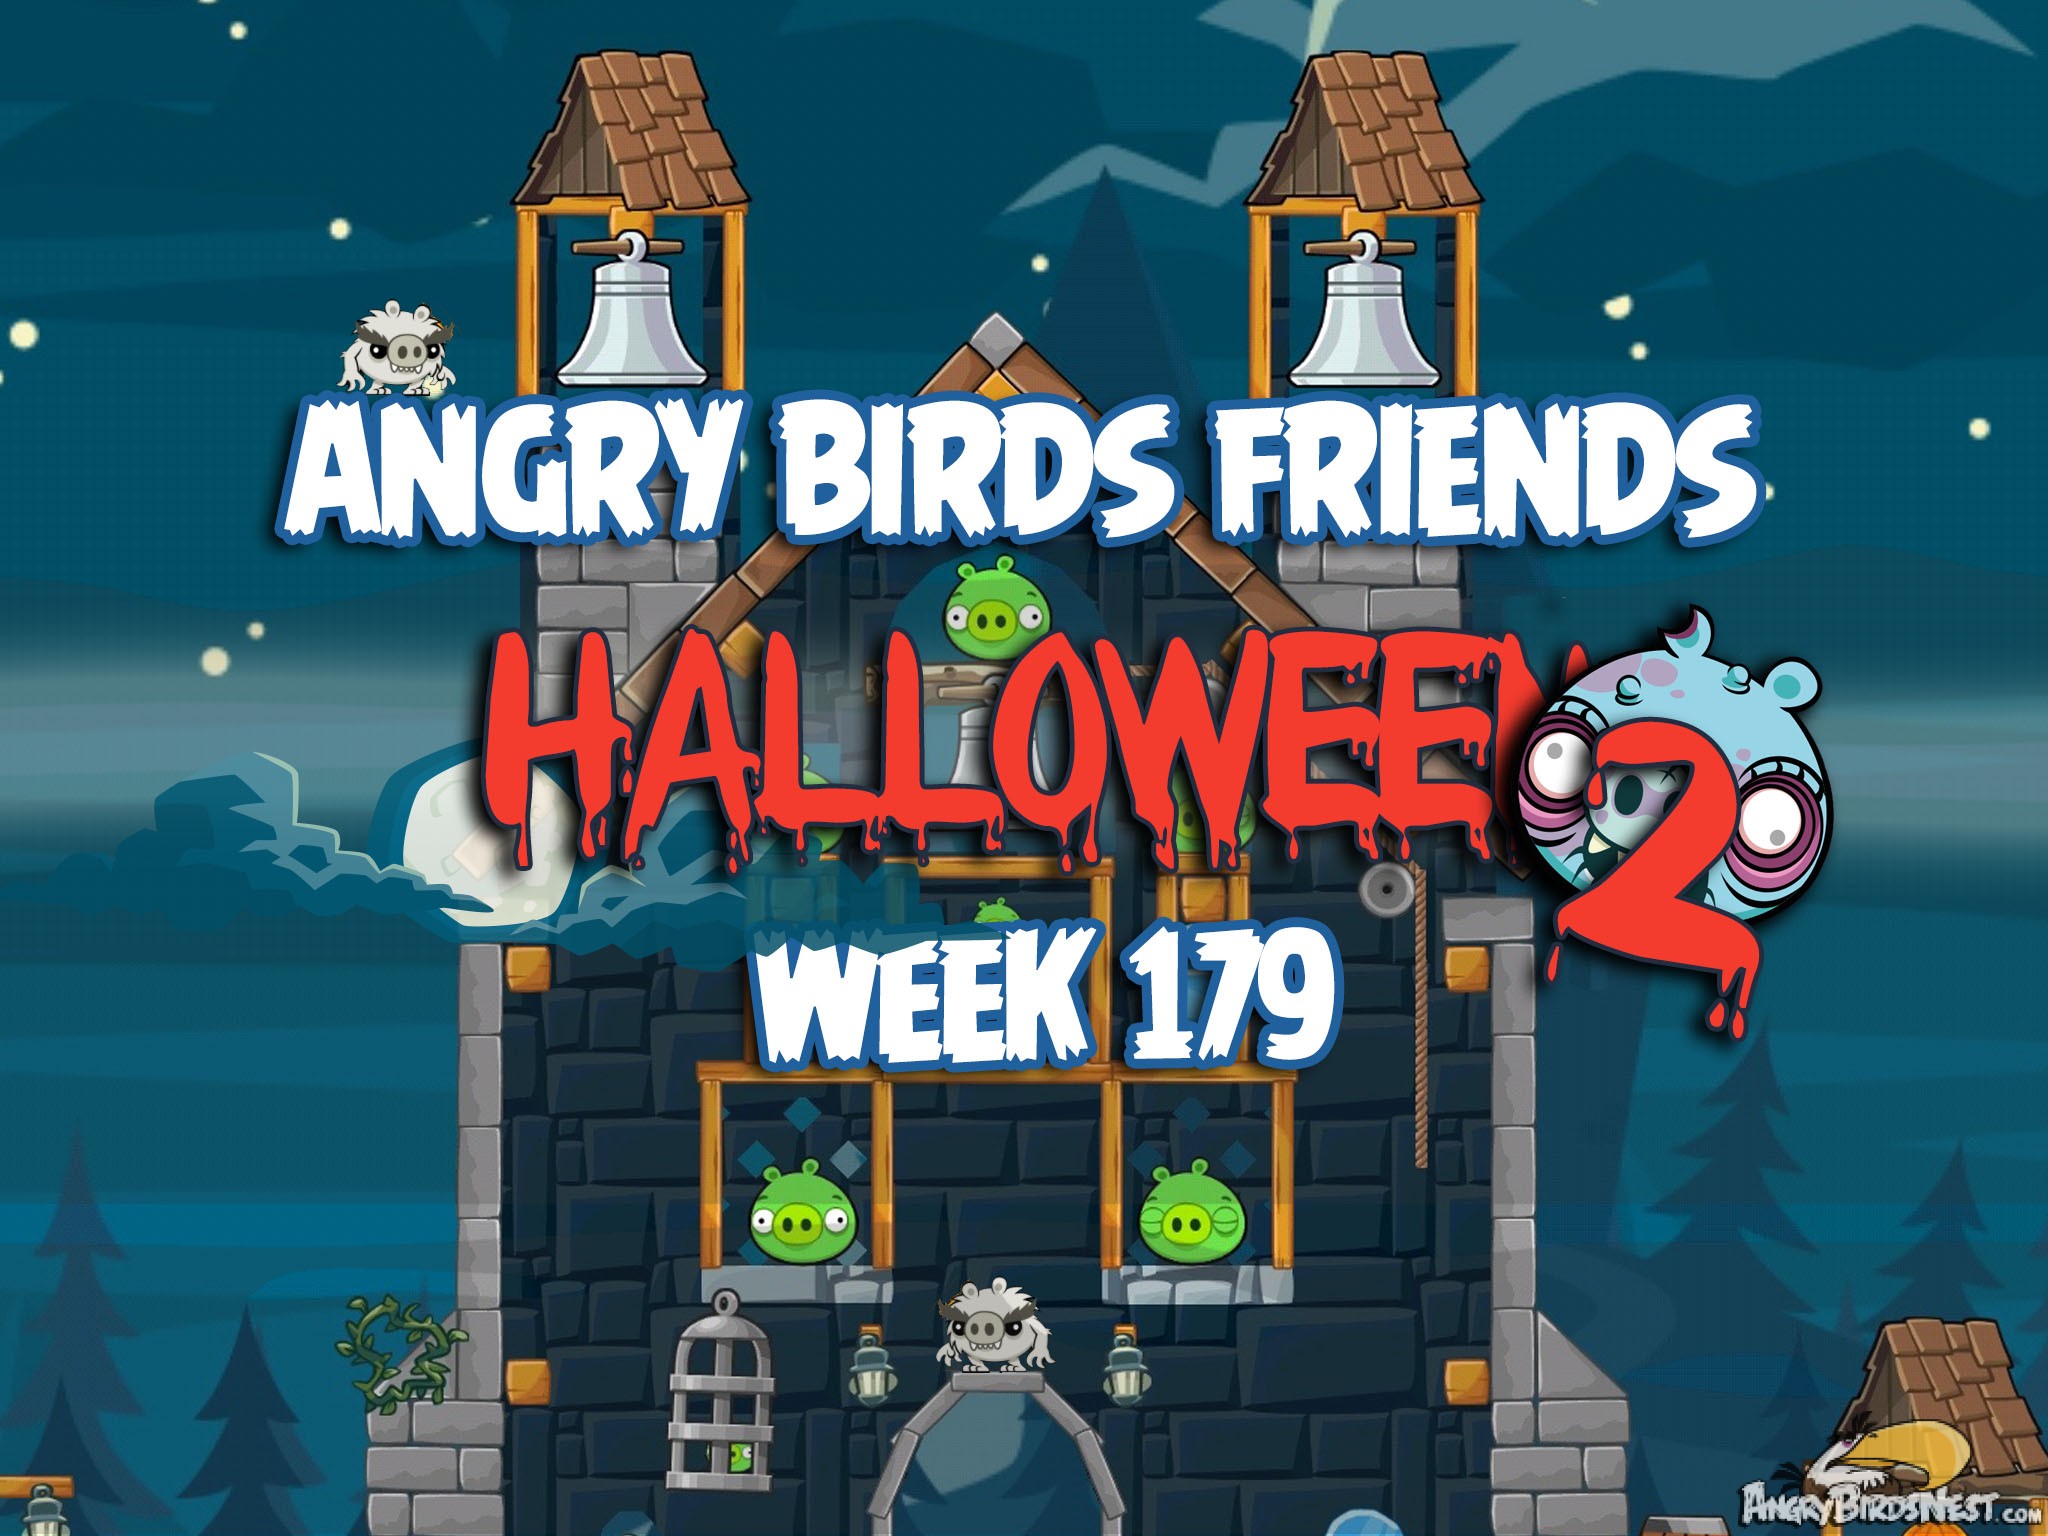 Angry Birds Friends Tournament Week 179 Feature Image